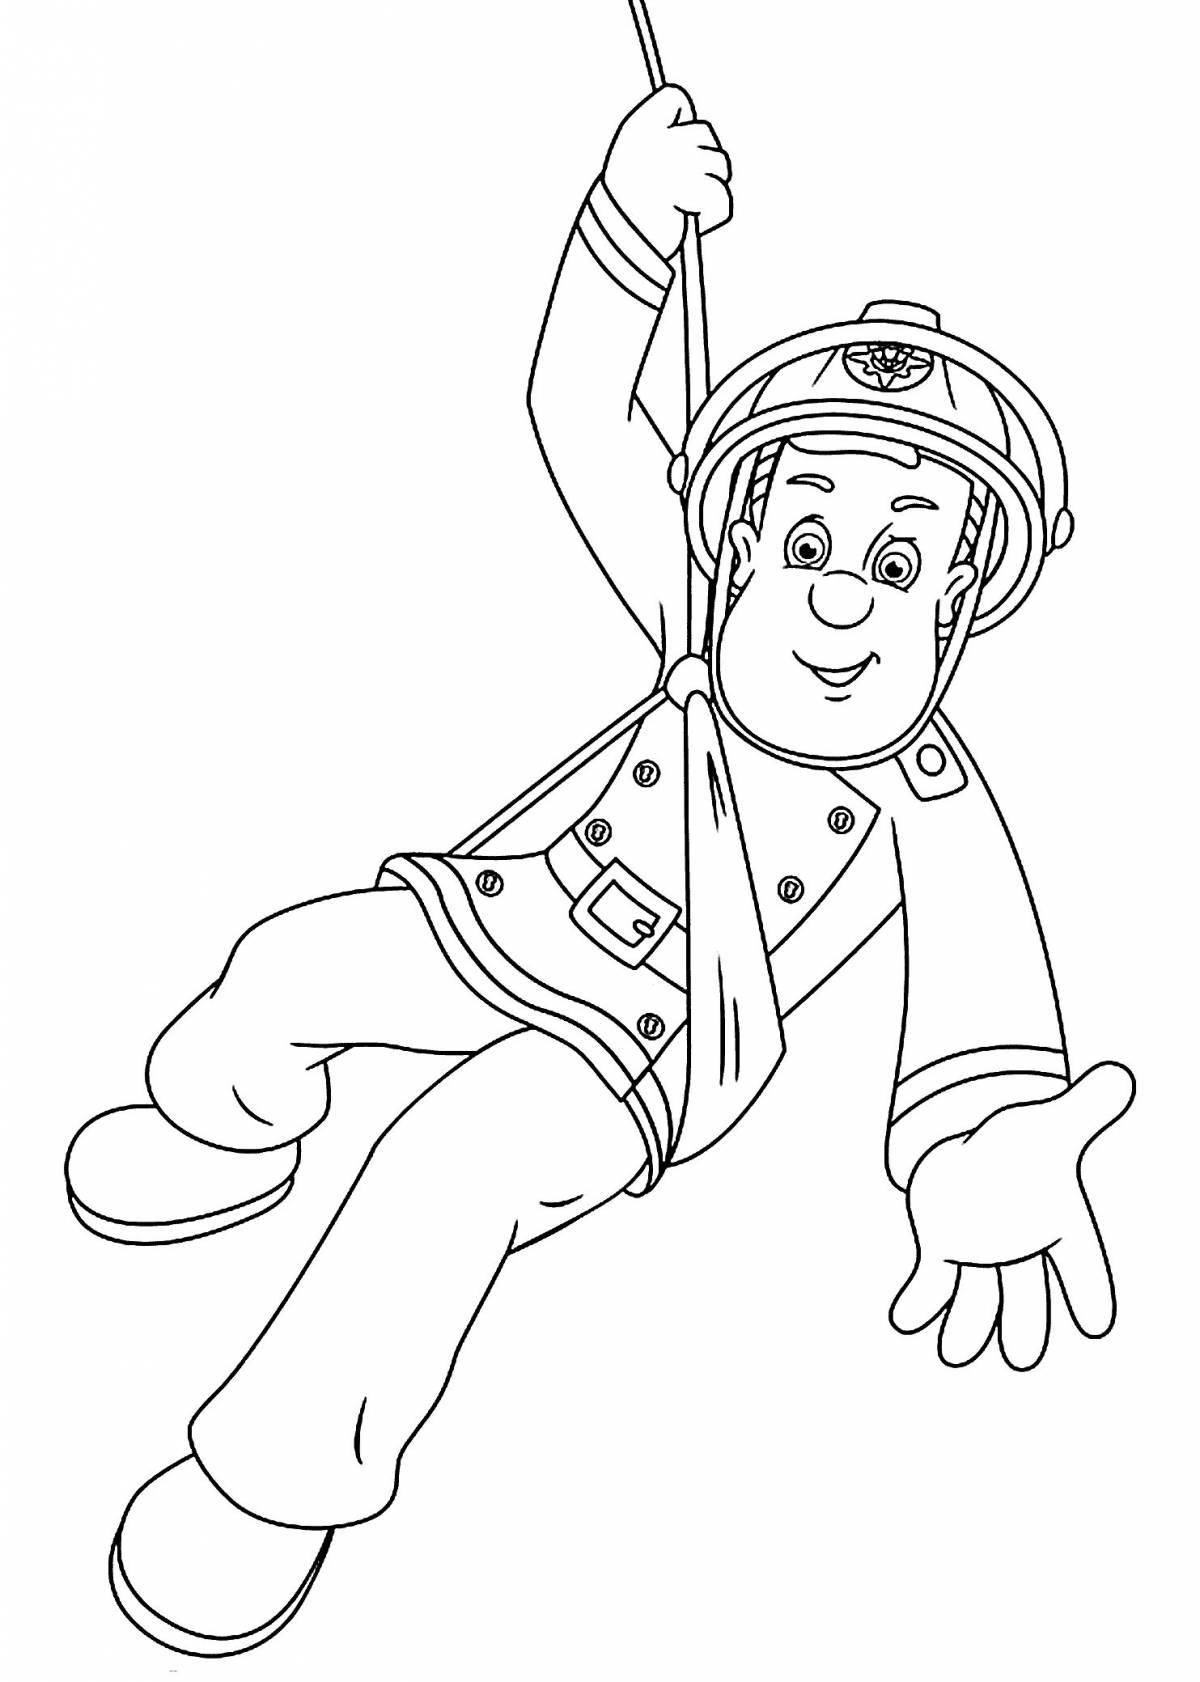 Cheerful lifeguard day coloring book